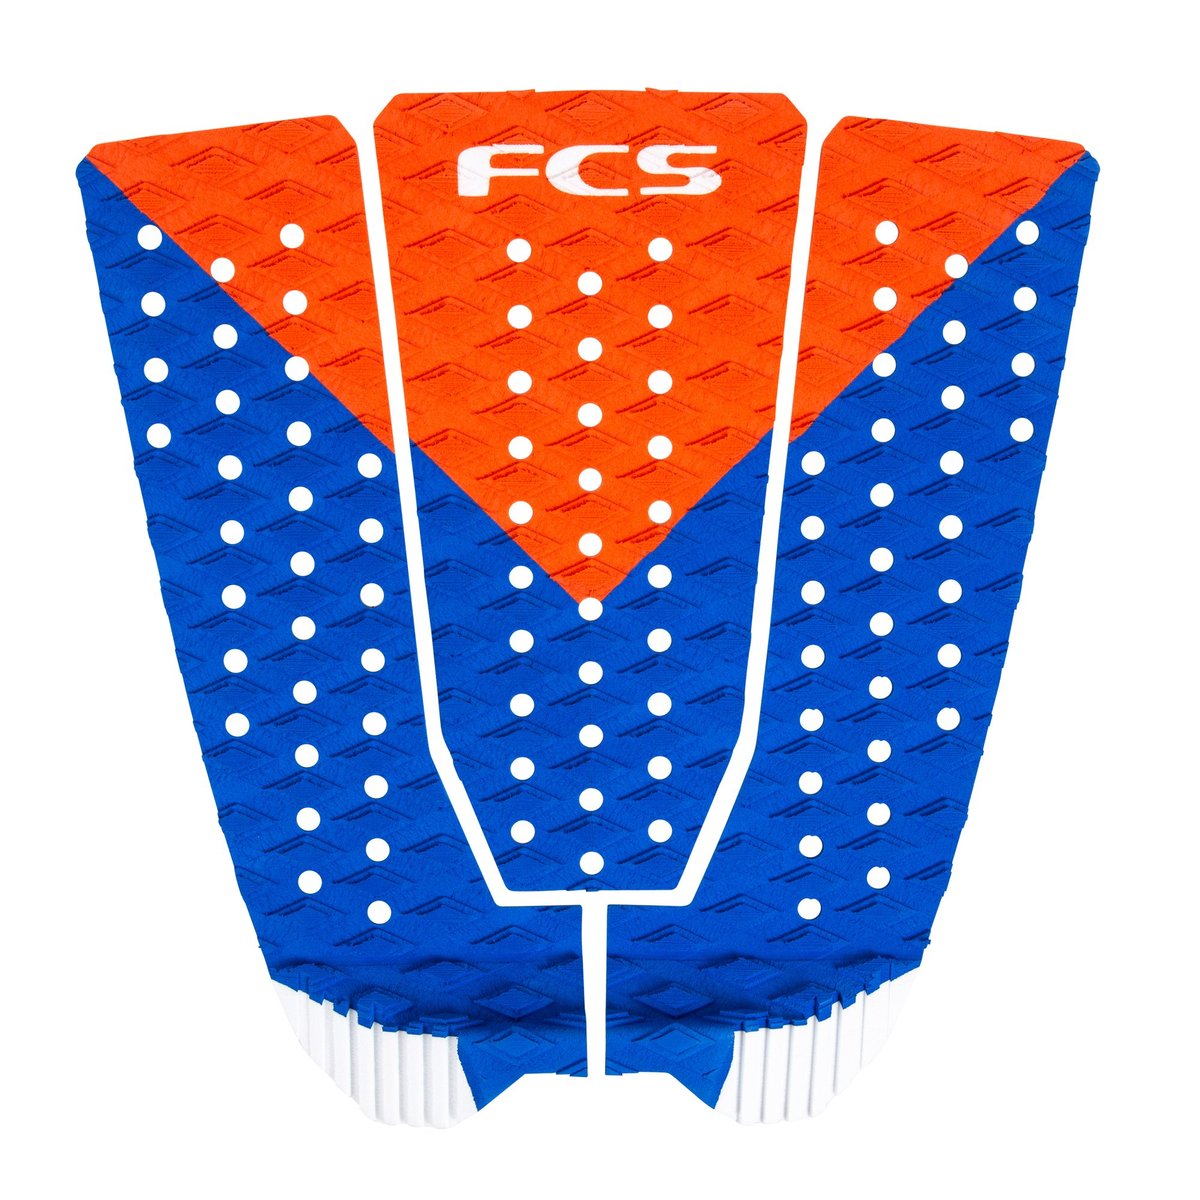 FCS Kolohe Signature Traction Pad surf traction Red White Blue